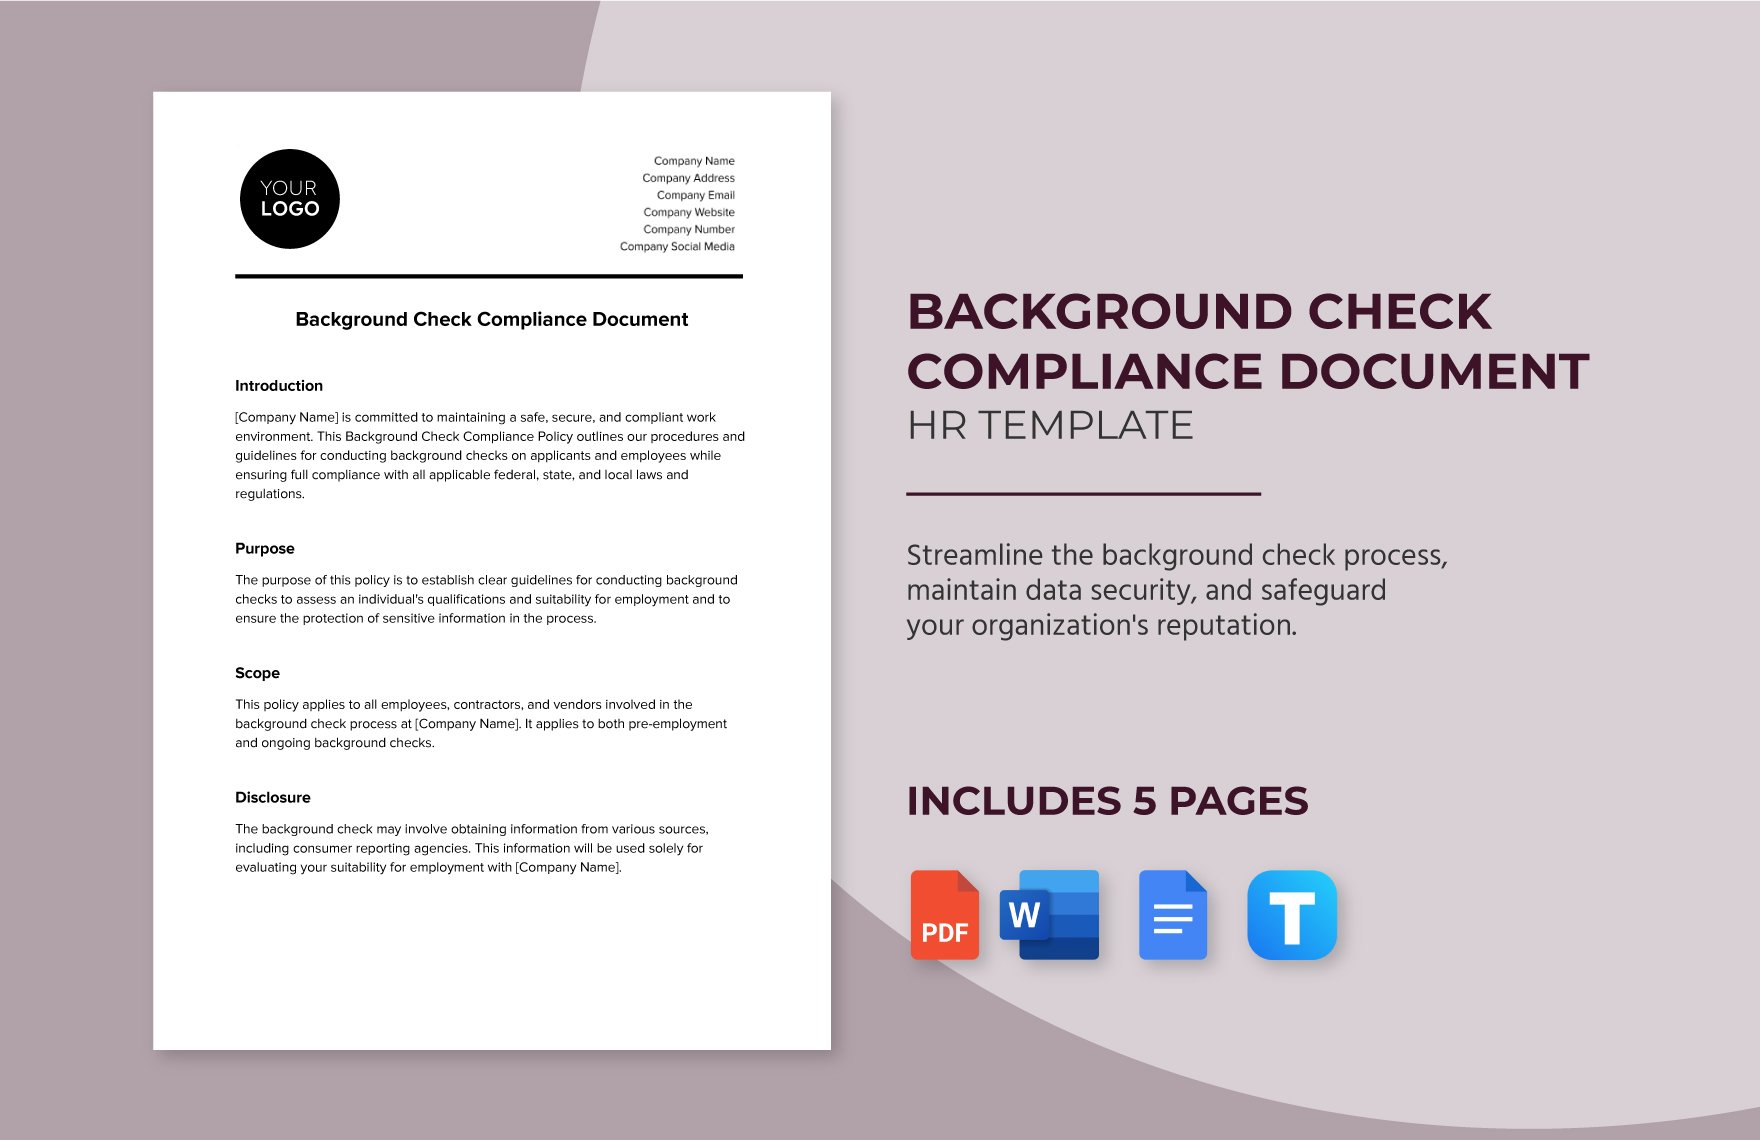 Background Check Compliance HR Template in Word, Google Docs, PDF